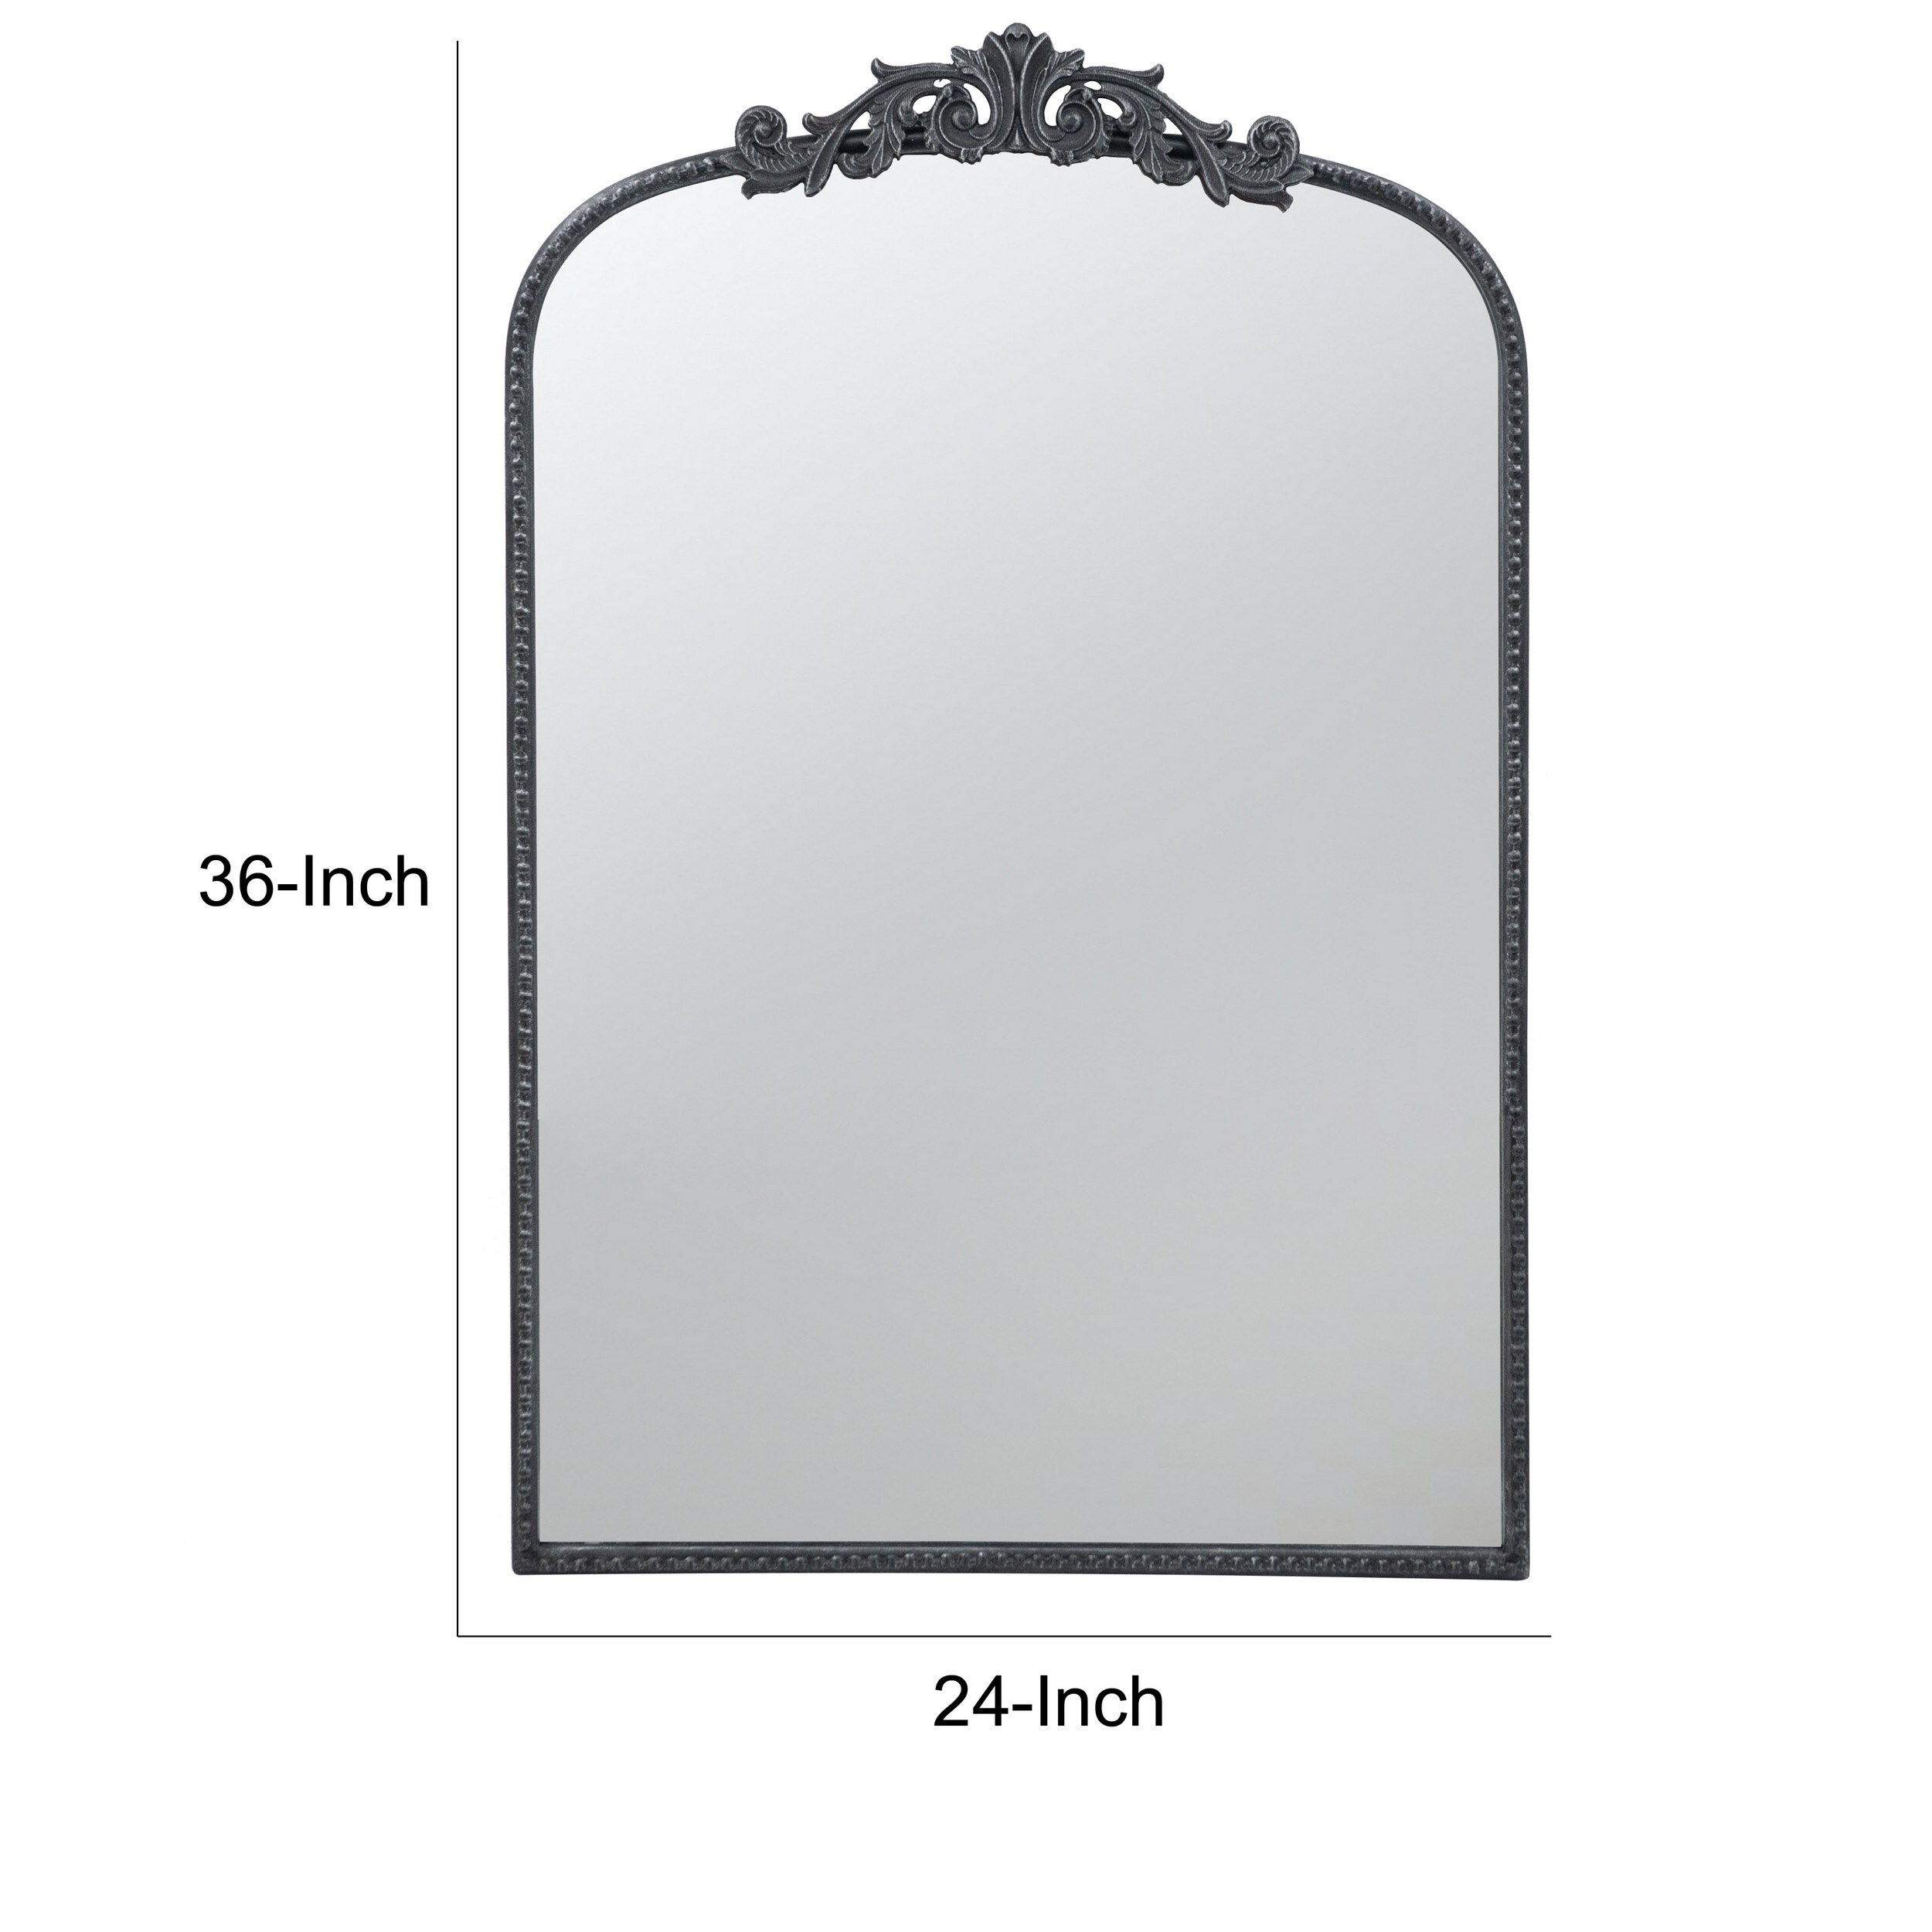 Kea 36 Inch Wall Mirror, Black Curved Metal Frame, Baroque Accent Design